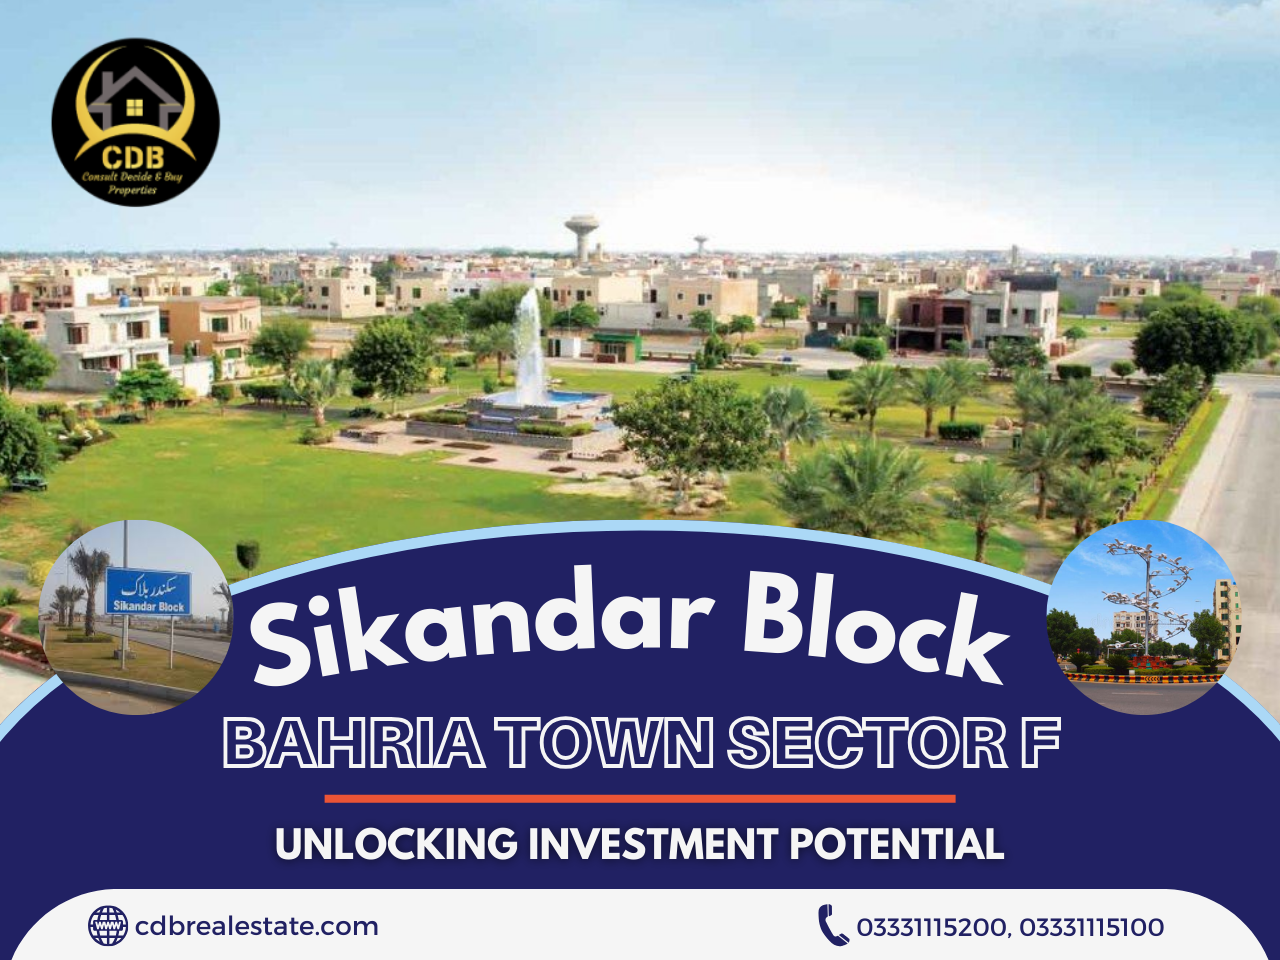 Sikandar Block in Bahria Town Sector F: Unlocking Investment Potential